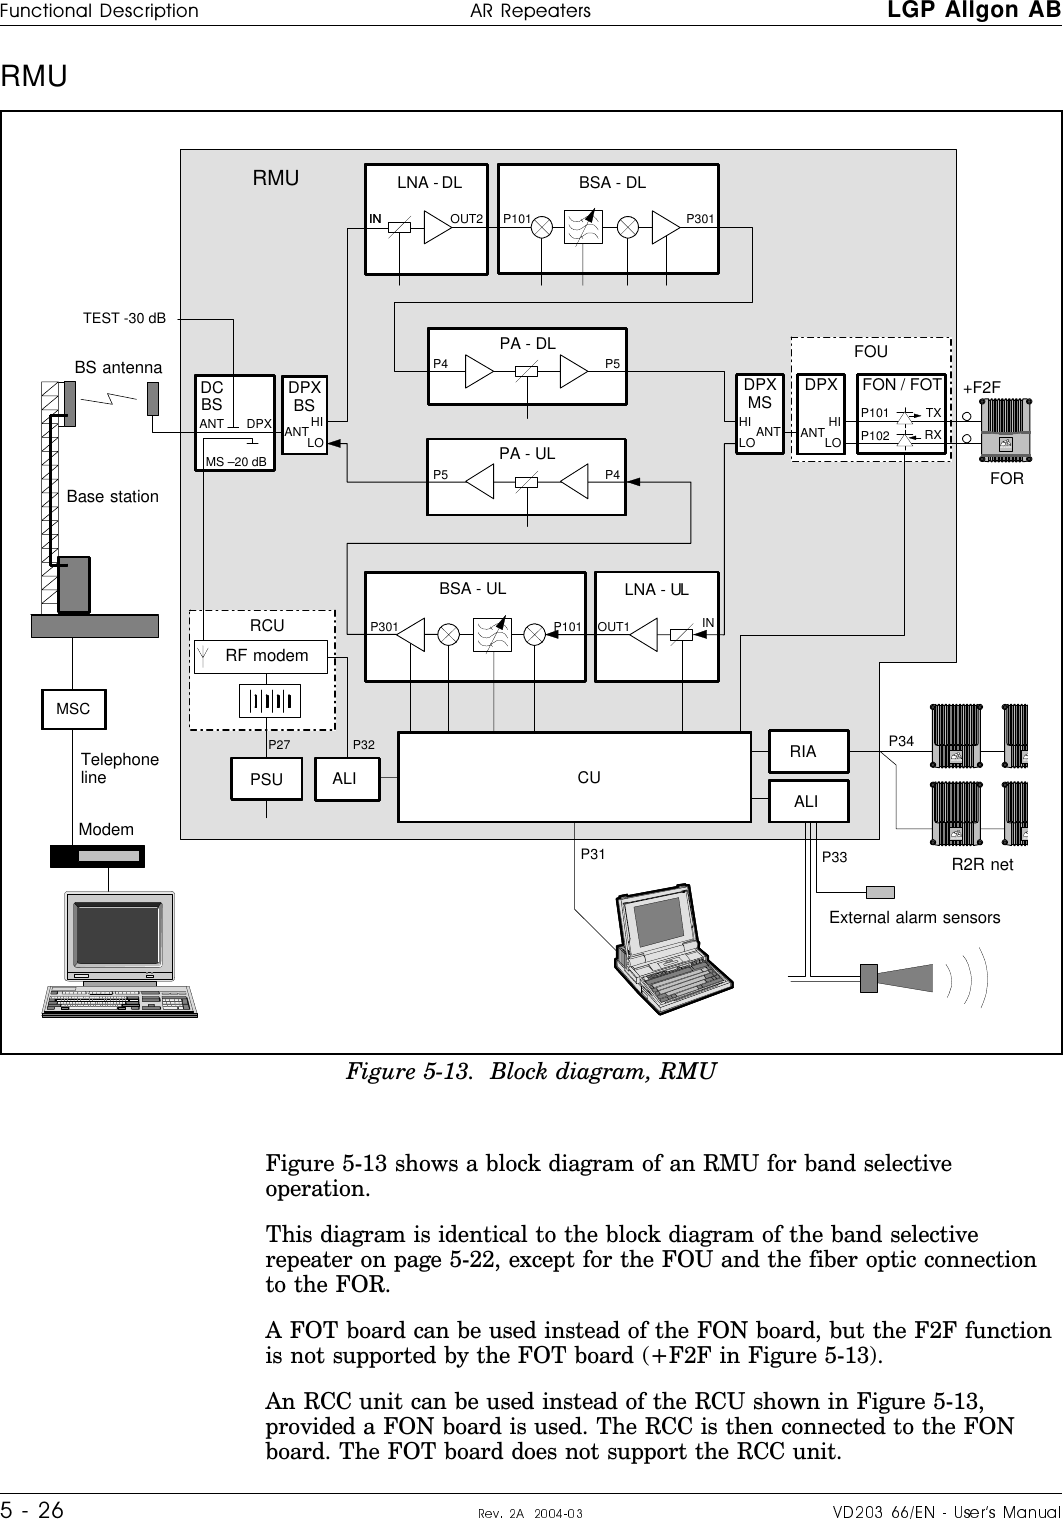 RMU Figure 5-13 shows a block diagram of an RMU for band selectiveoperation.This diagram is identical to the block diagram of the band selectiverepeater on page 5-22, except for the FOU and the fiber optic connectionto the FOR.A FOT board can be used instead of the FON board, but the F2F functionis not supported by the FOT board (+F2F in Figure 5-13).An RCC unit can be used instead of the RCU shown in Figure 5-13,provided a FON board is used. The RCC is then connected to the FONboard. The FOT board does not support the RCC unit.MSCDCBSP32P31 P33TEST -30 dBBSA - DLPA - DLLNA - DLMS –20 dB PA - ULBSA - UL LNA - ULDPXMSDPXBSALIRIA P34ALLGONALLGONALLALLP27ANT DPX ANTHILO ANTHILOIN OUT2 P101 P301P4 P5ININOUT1P301 P101P4P5RCUPSU ALIFON / FOTP101 TXRXP102DPXANT HILOFOUFORALLGONCU+F2FRMUBS antennaBase stationTelephonelineModemRF modemExternal alarm sensorsR2R netFigure 5-13.  Block diagram, RMU¦o6cro#fH6c|cro H|H#H LGP Allgon ABSa¤